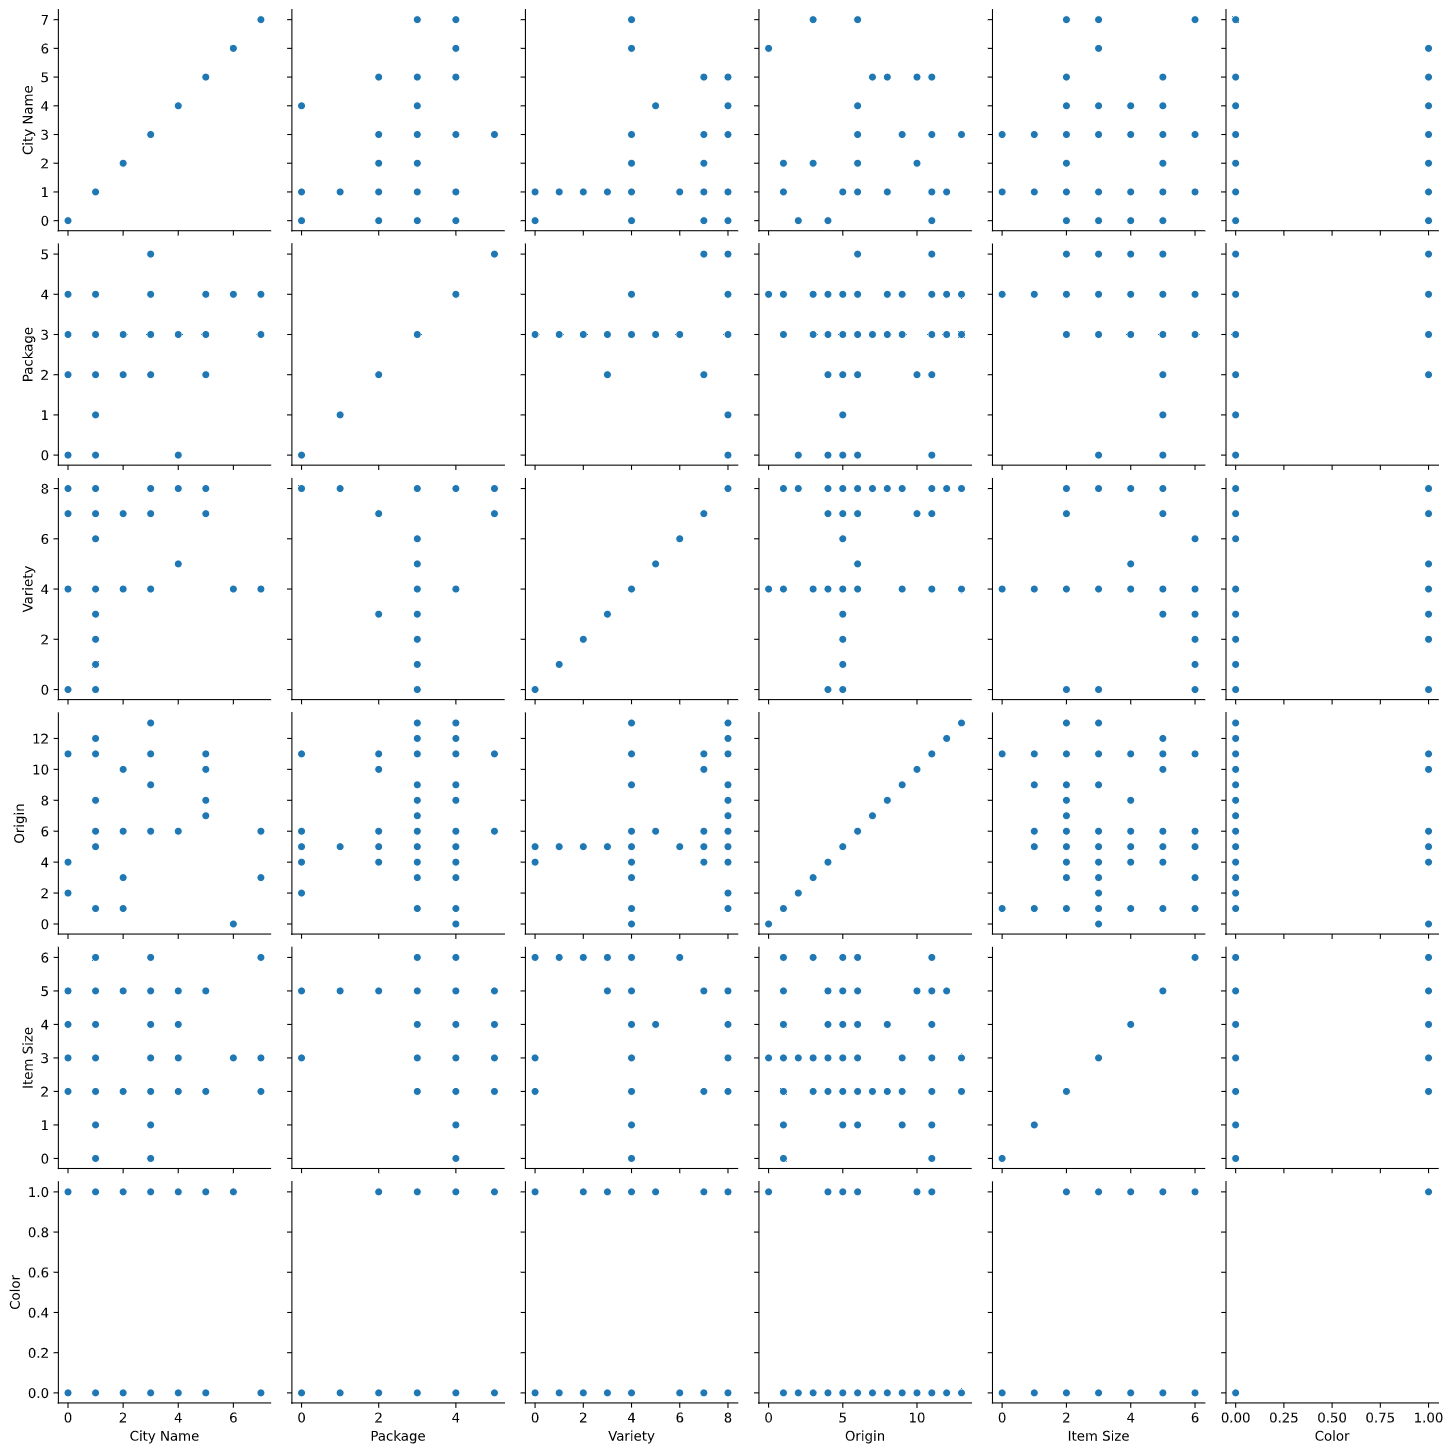 A grid of visualized data